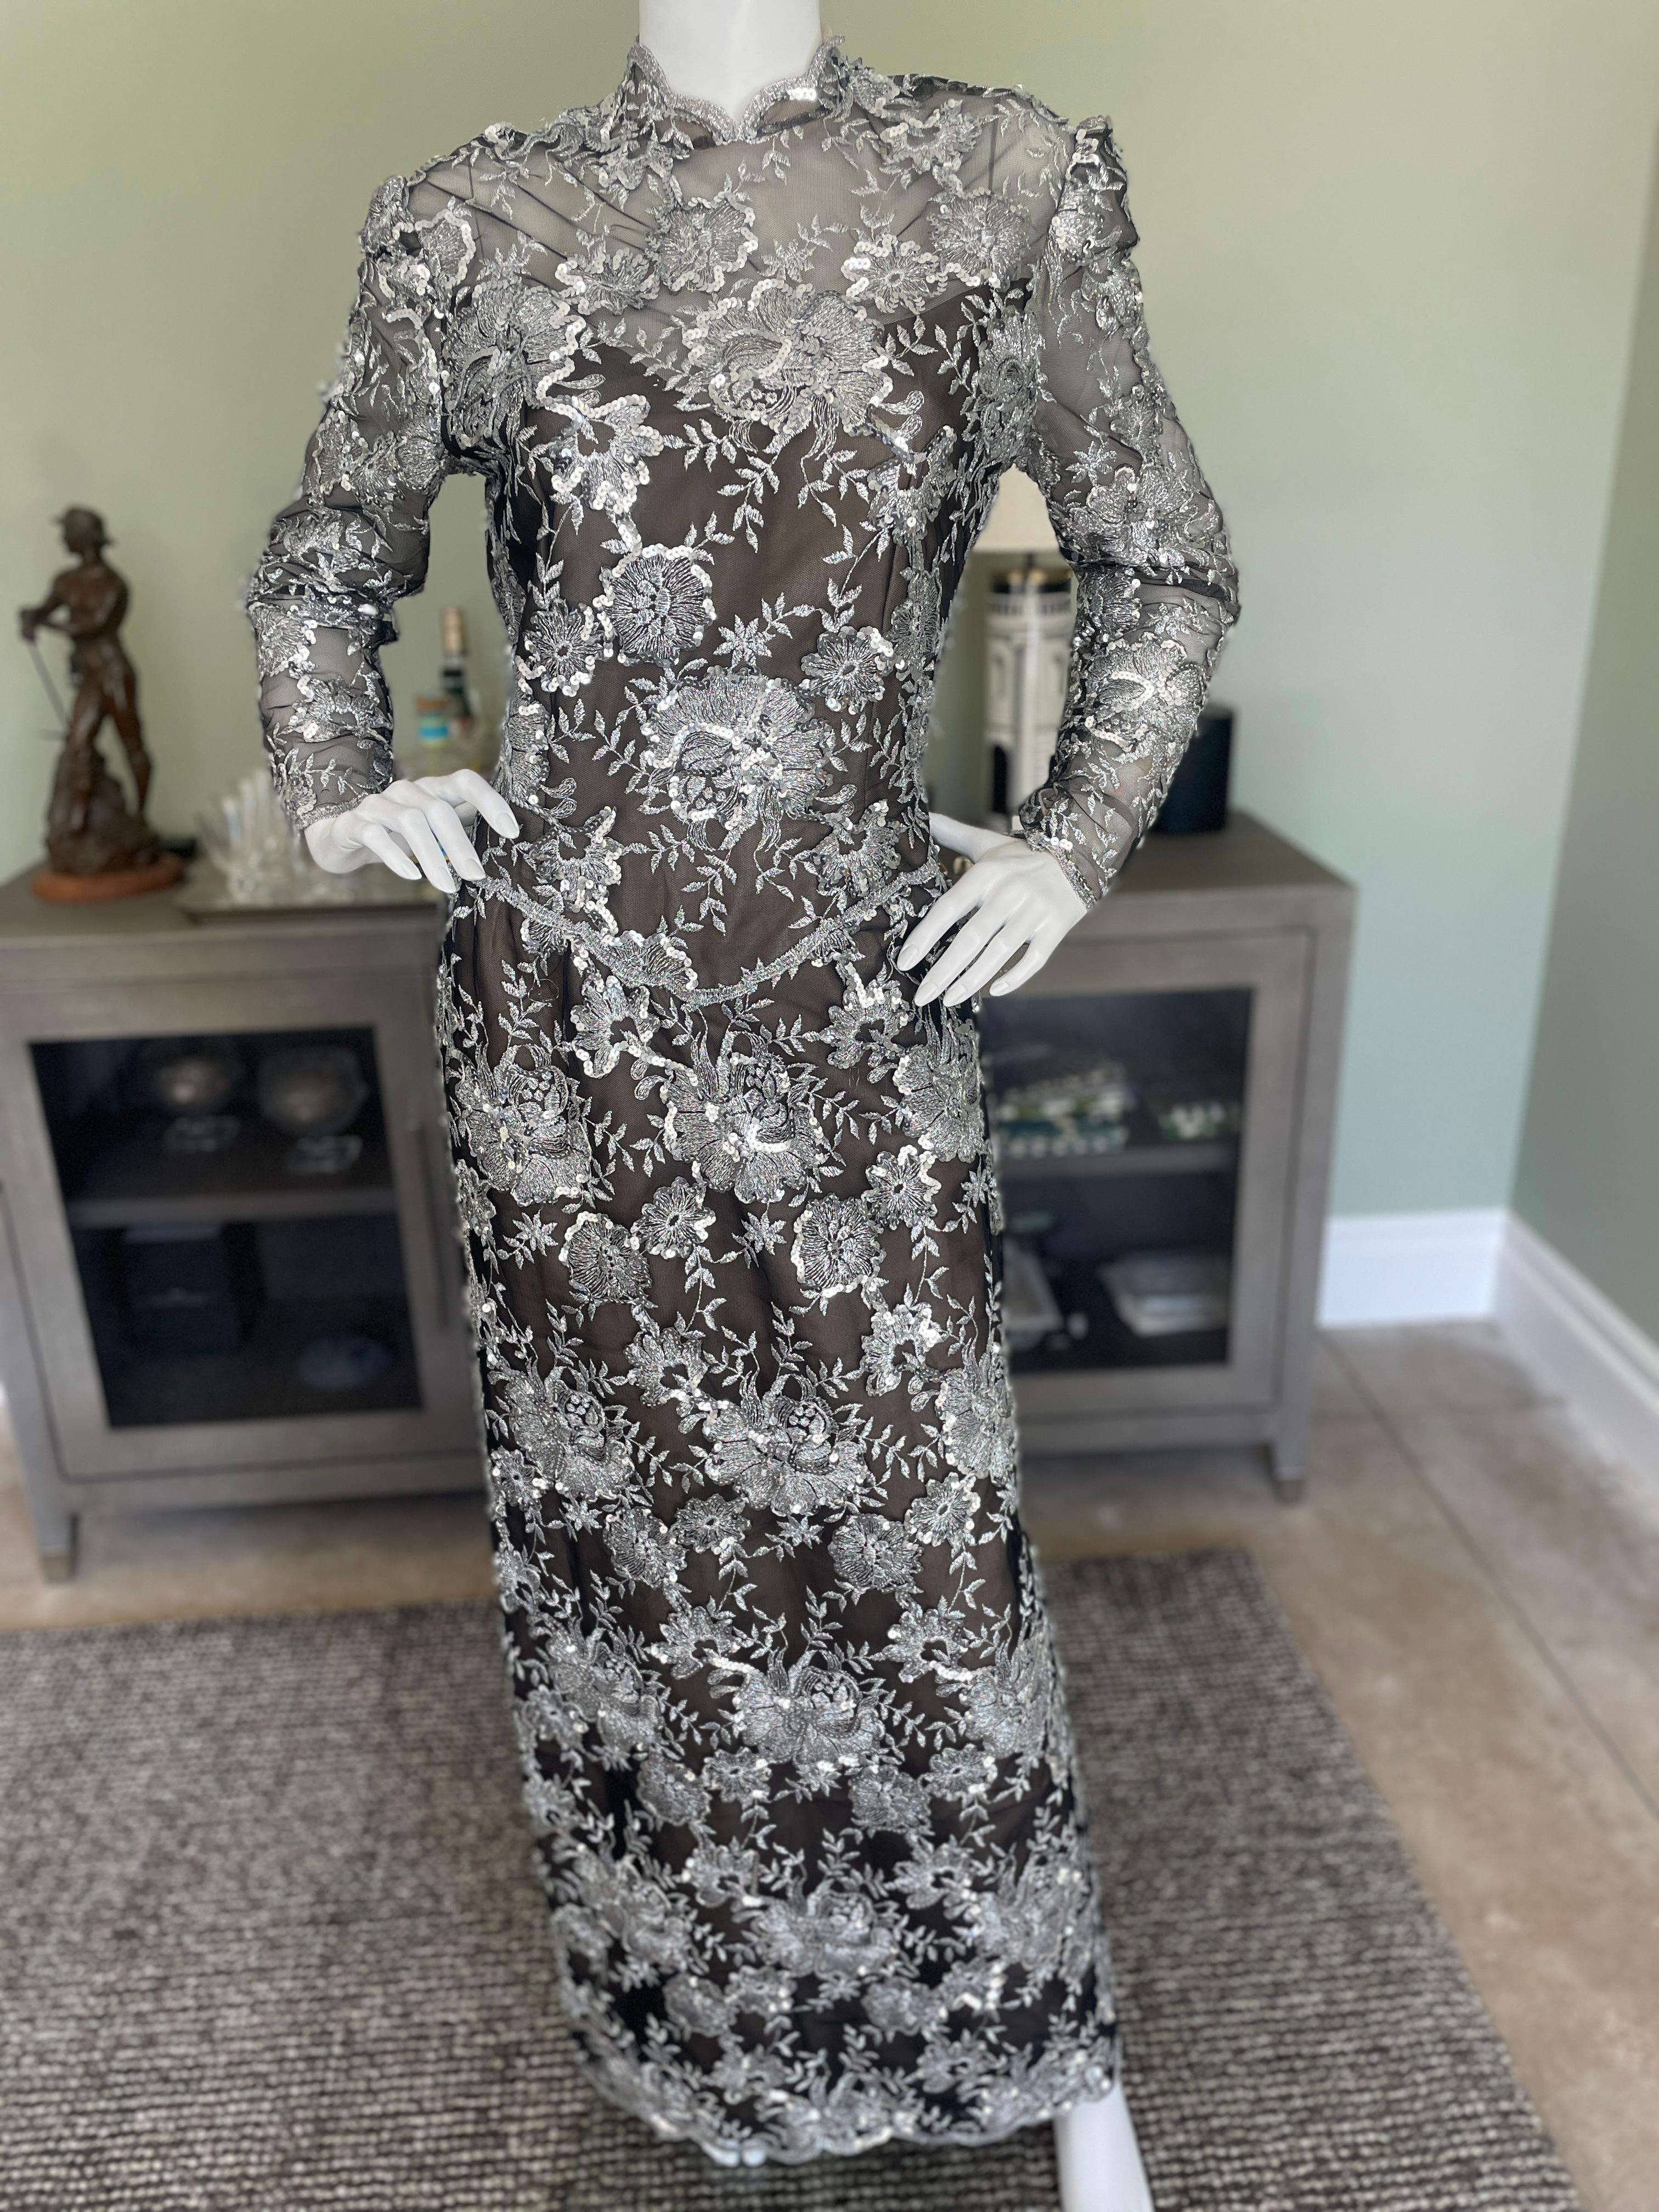 Victor Costa Vintage 1980's Embroidered Sequined Silver Lace Evening Dress In Good Condition For Sale In Cloverdale, CA